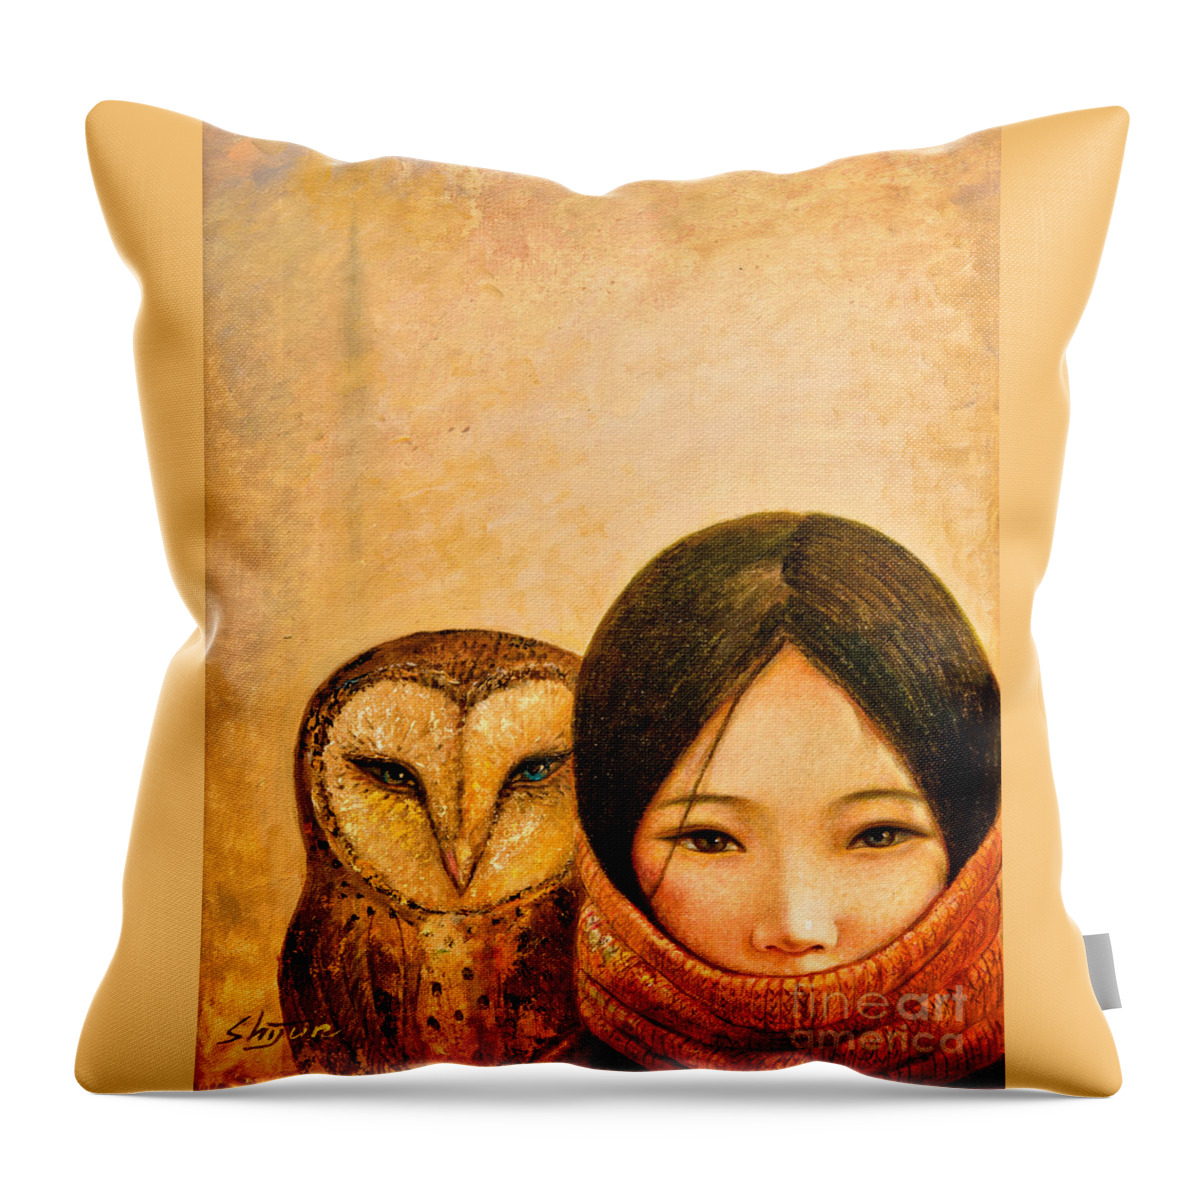 Shijun Throw Pillow featuring the painting Girl with Owl by Shijun Munns